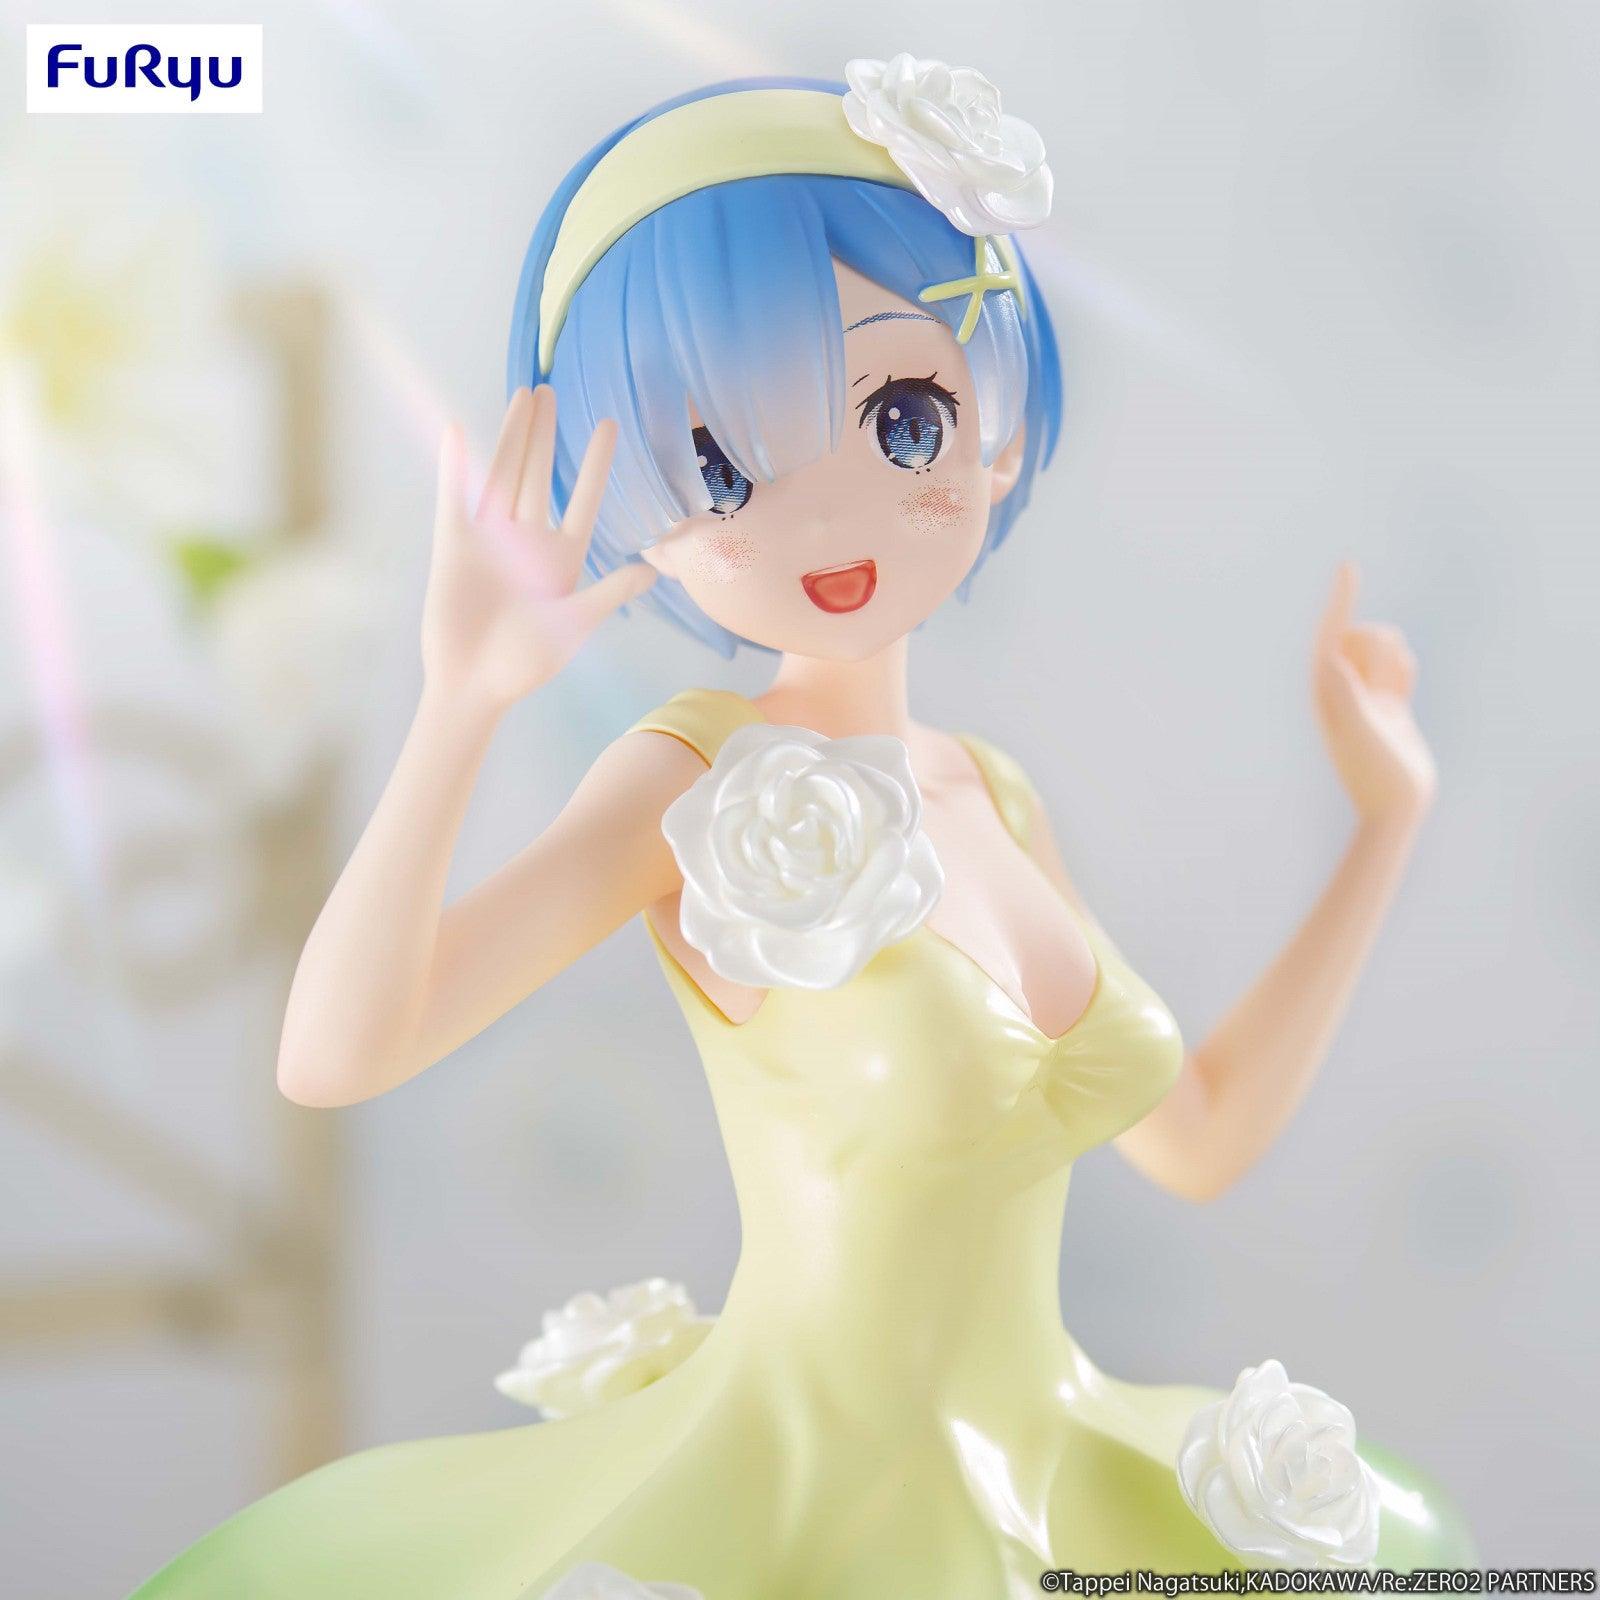 VR-106702 Re:ZERO Starting Life in Another World Trio Try iT Figure Rem Flower Dress - Good Smile Company - Titan Pop Culture